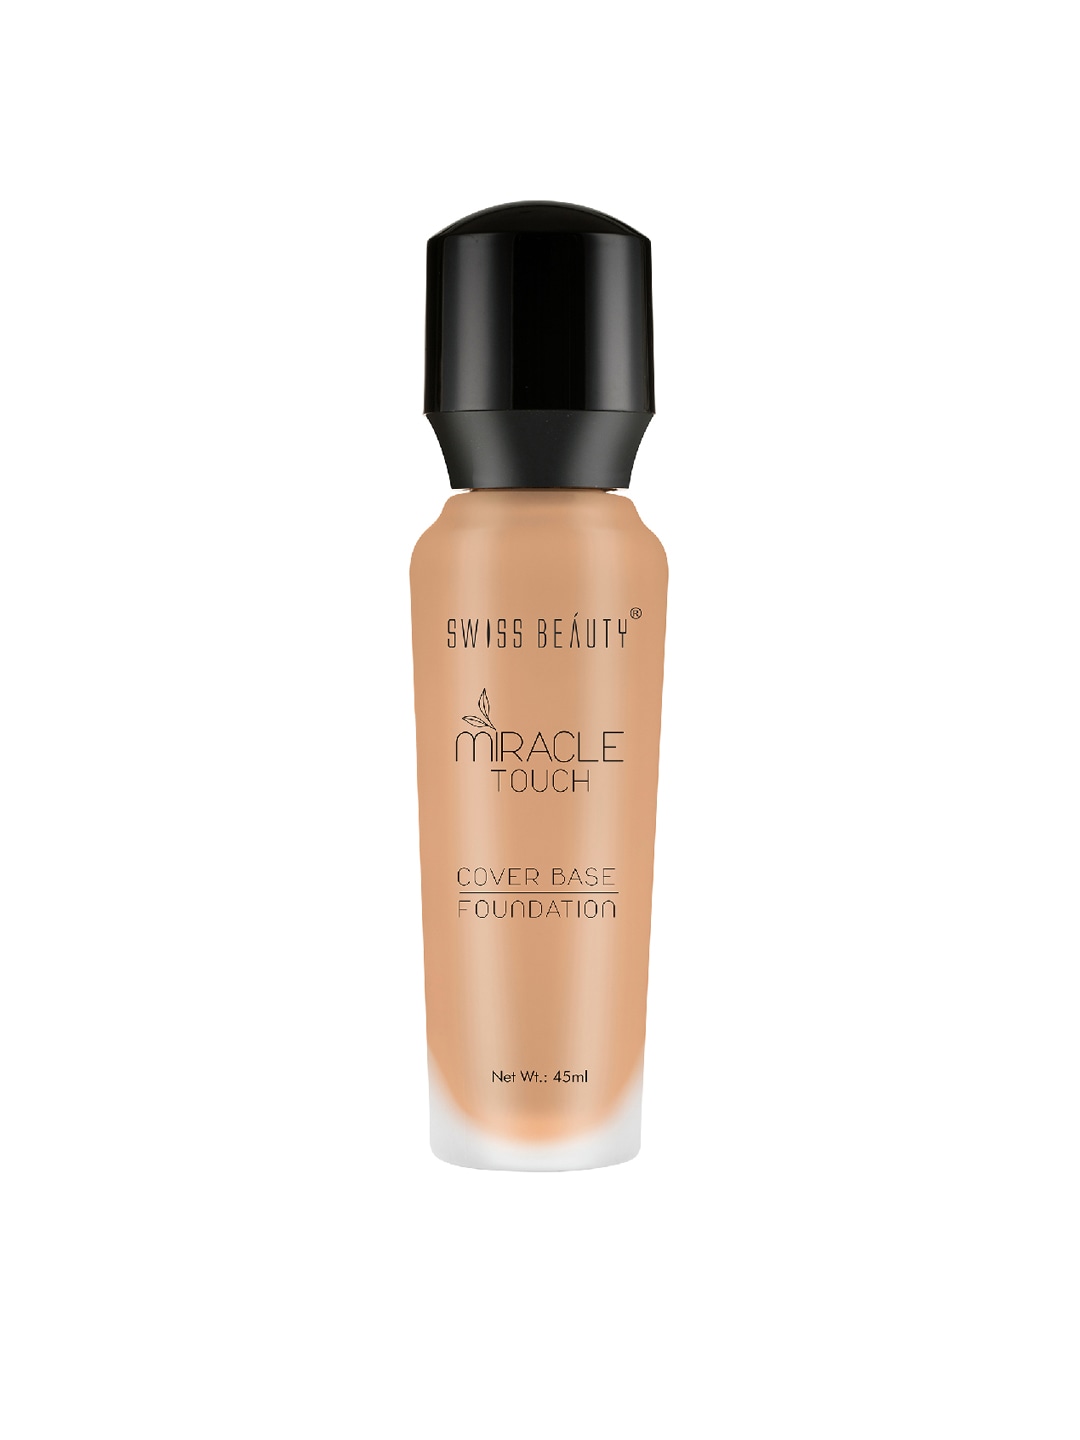 SWISS BEAUTY Miracle Touch Cover Base SPF 15 Foundation 45 ml - Medium Price in India